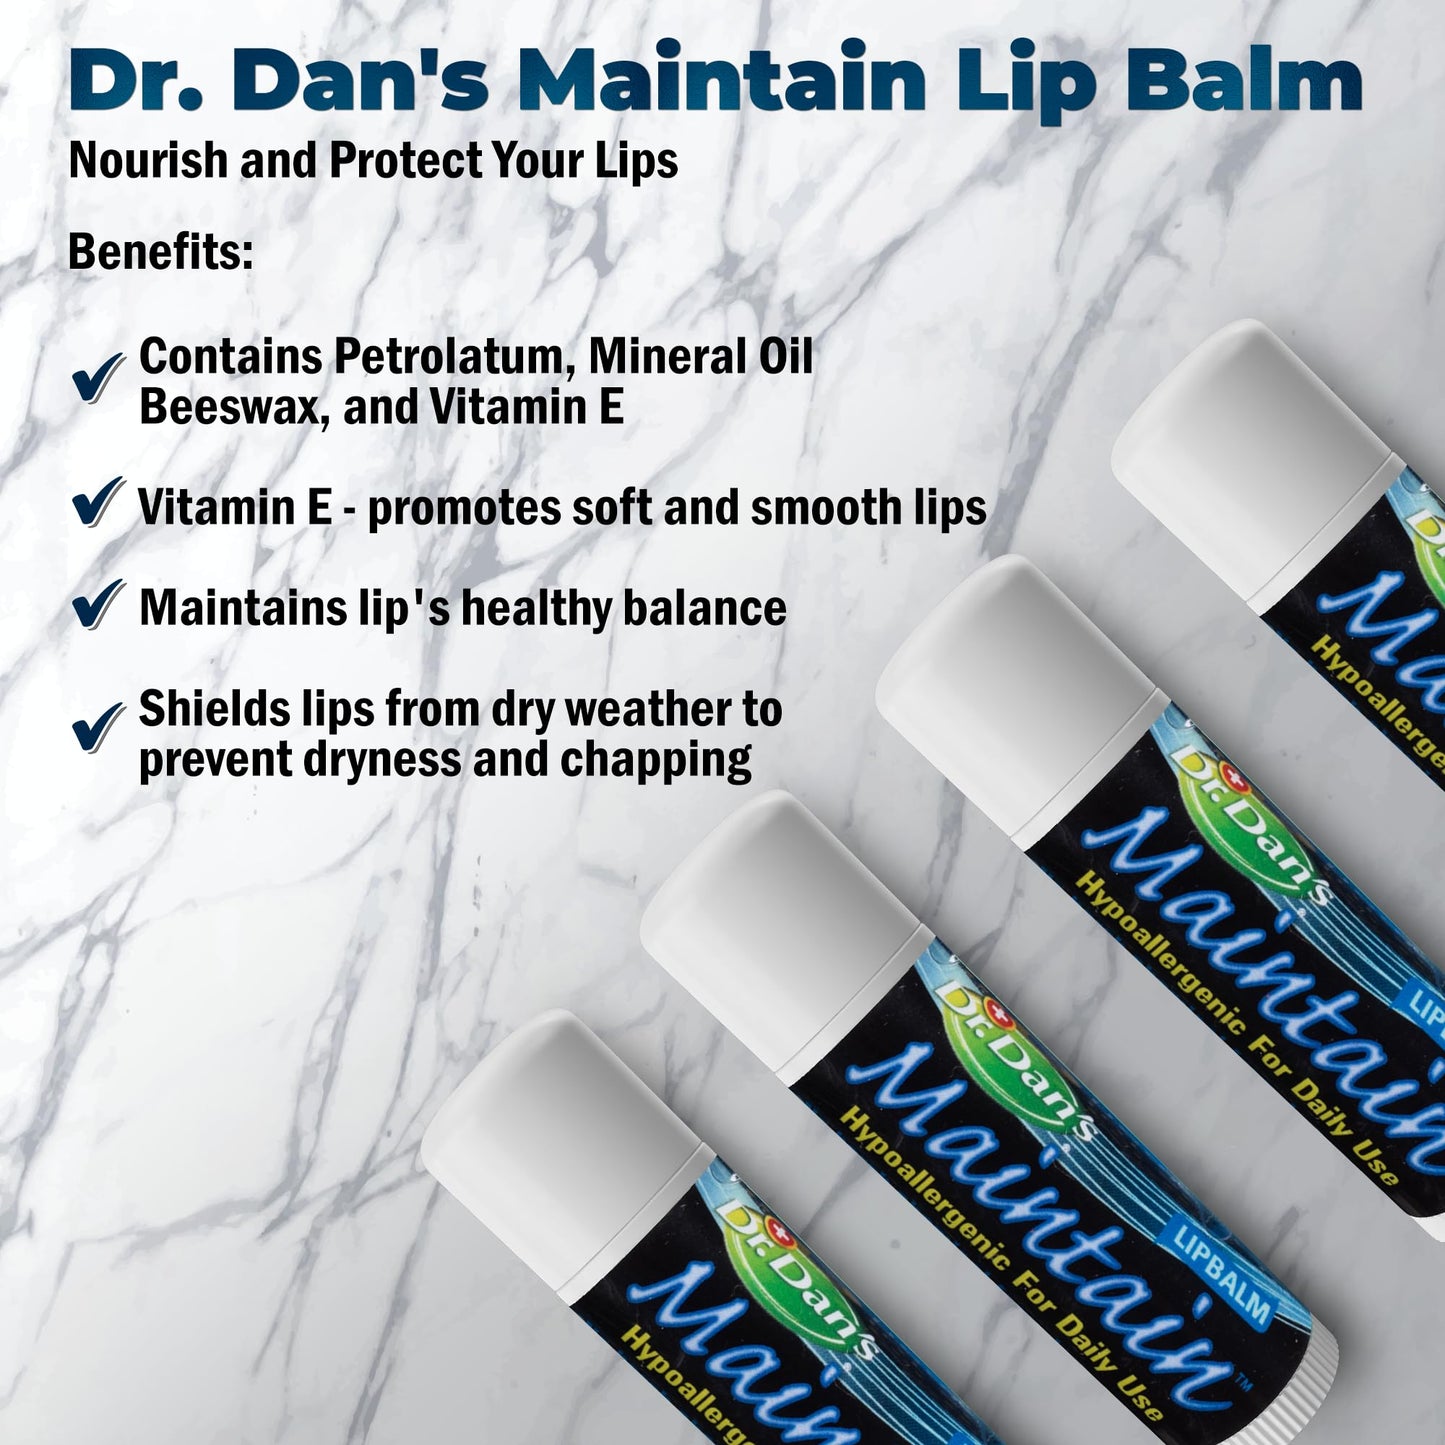 Dr. Dan's Maintain Lip Balm - Perfect for Everyday and Cortibalm aftercare, Mild Ingredients & Beeswax, Vitamin E Enriched for Moisturizing Dry Lips, Ensures Smooth, Soft Feel, 3 Pack